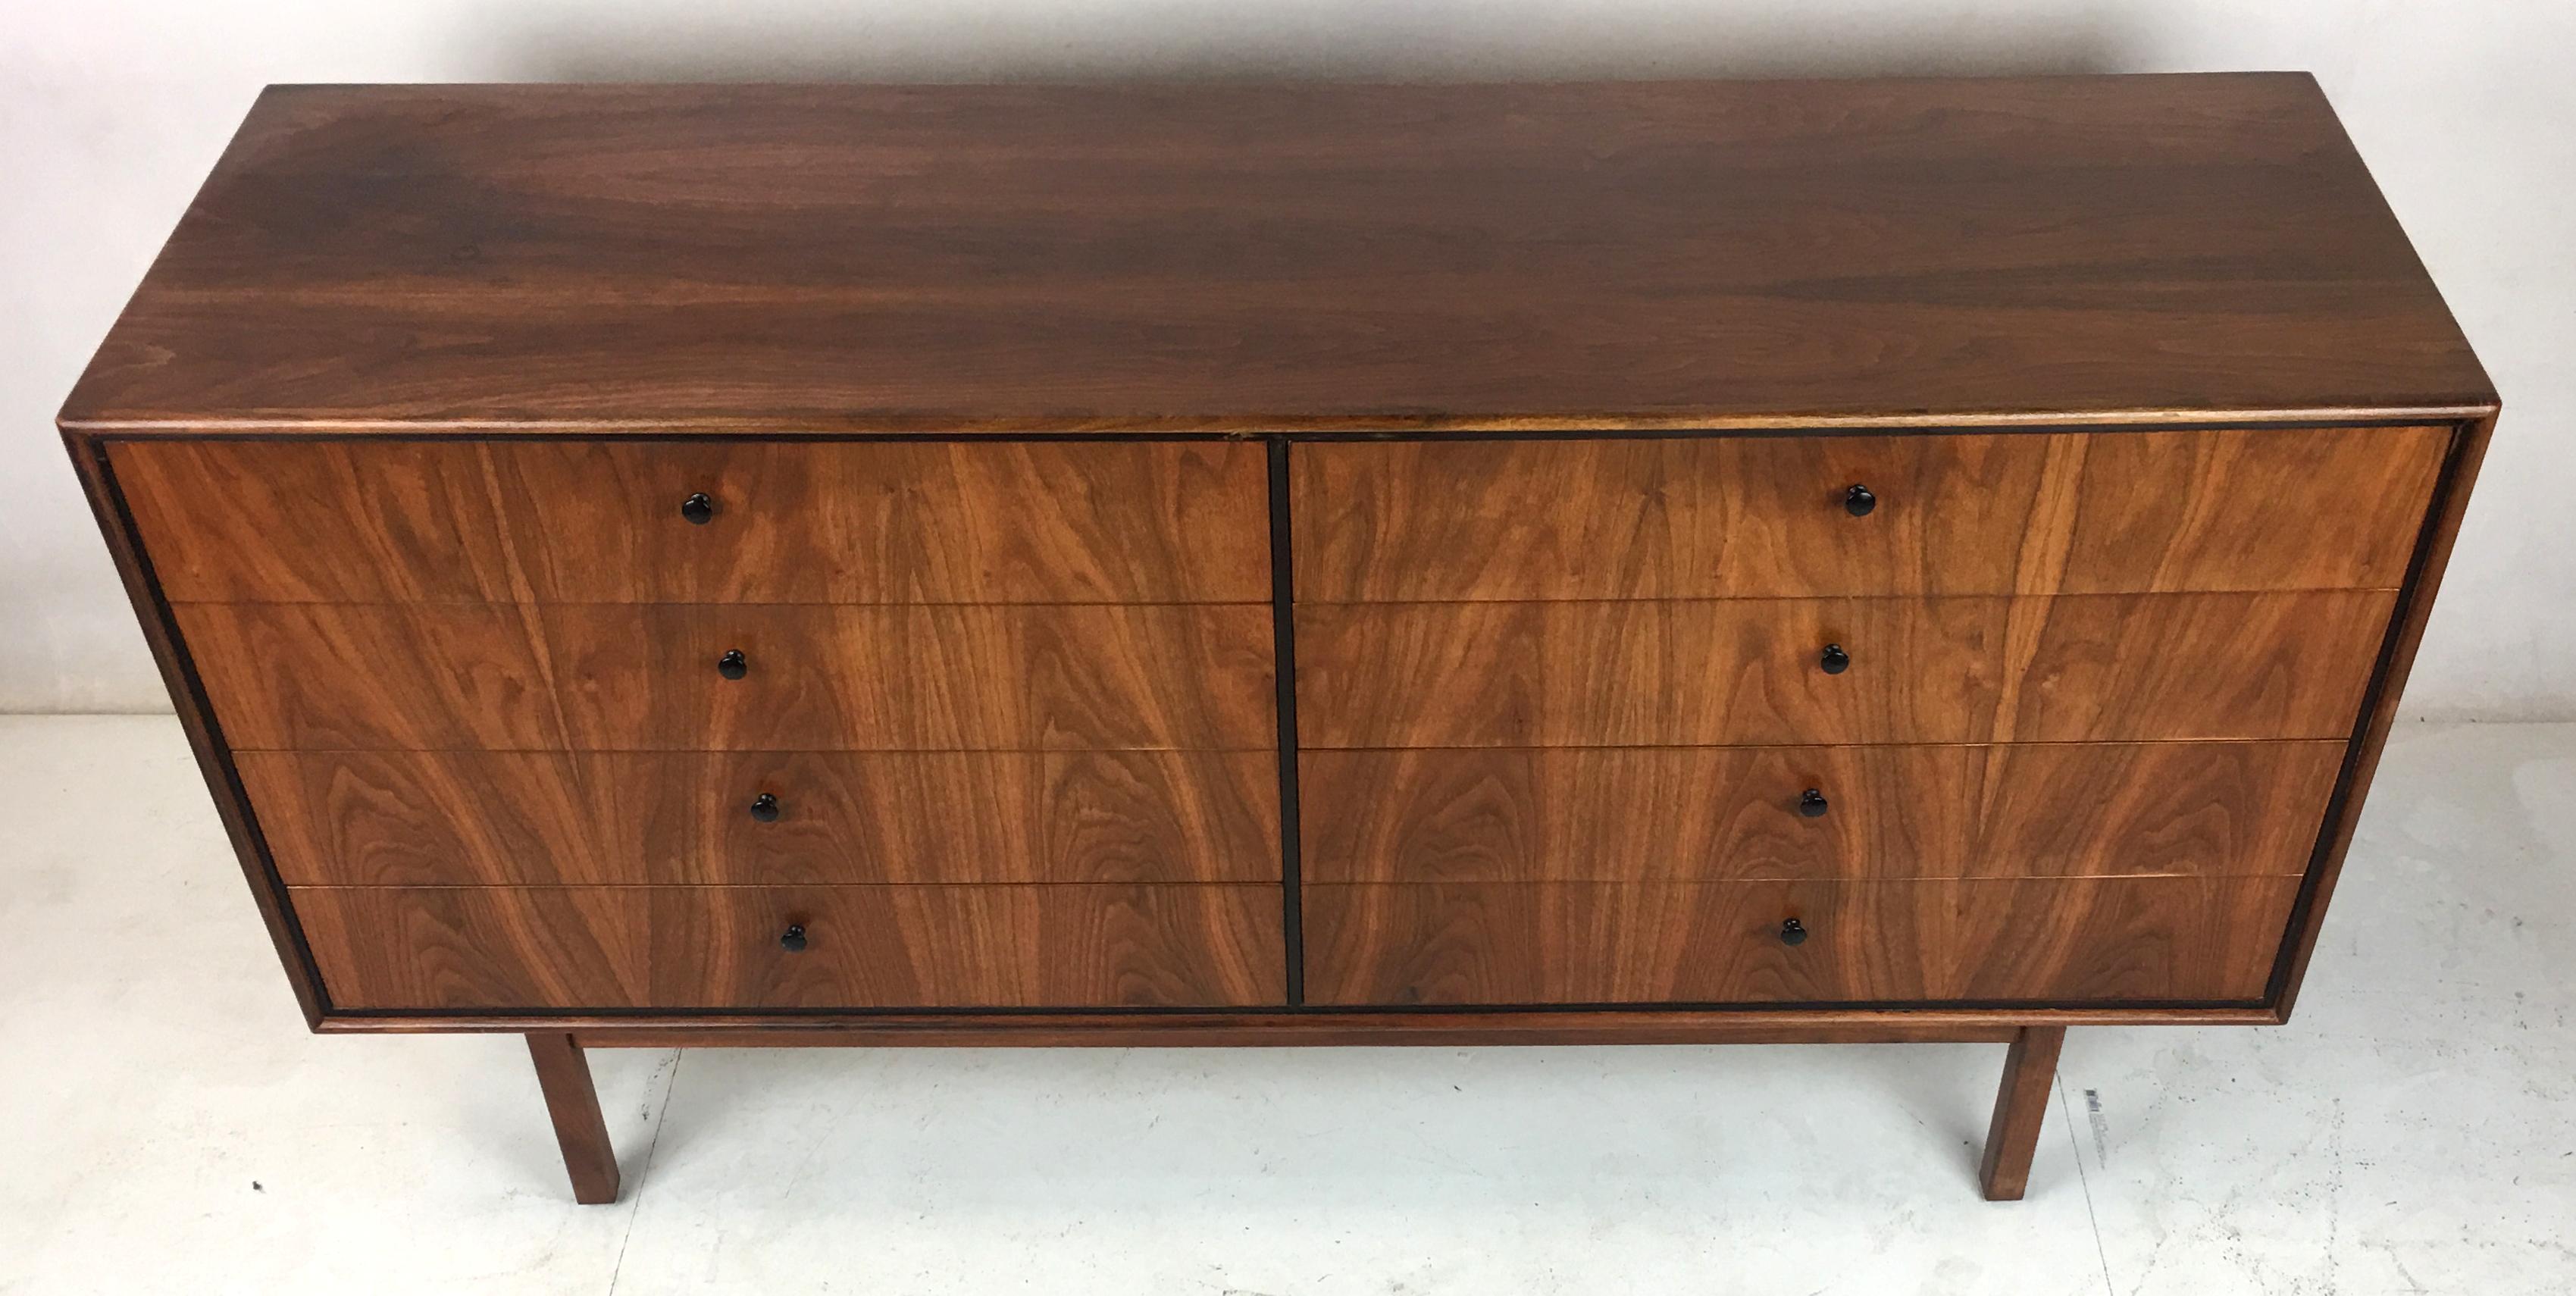 Mid-Century Modern Exquisite Walnut Dresser by Jack Cartwright for Founders